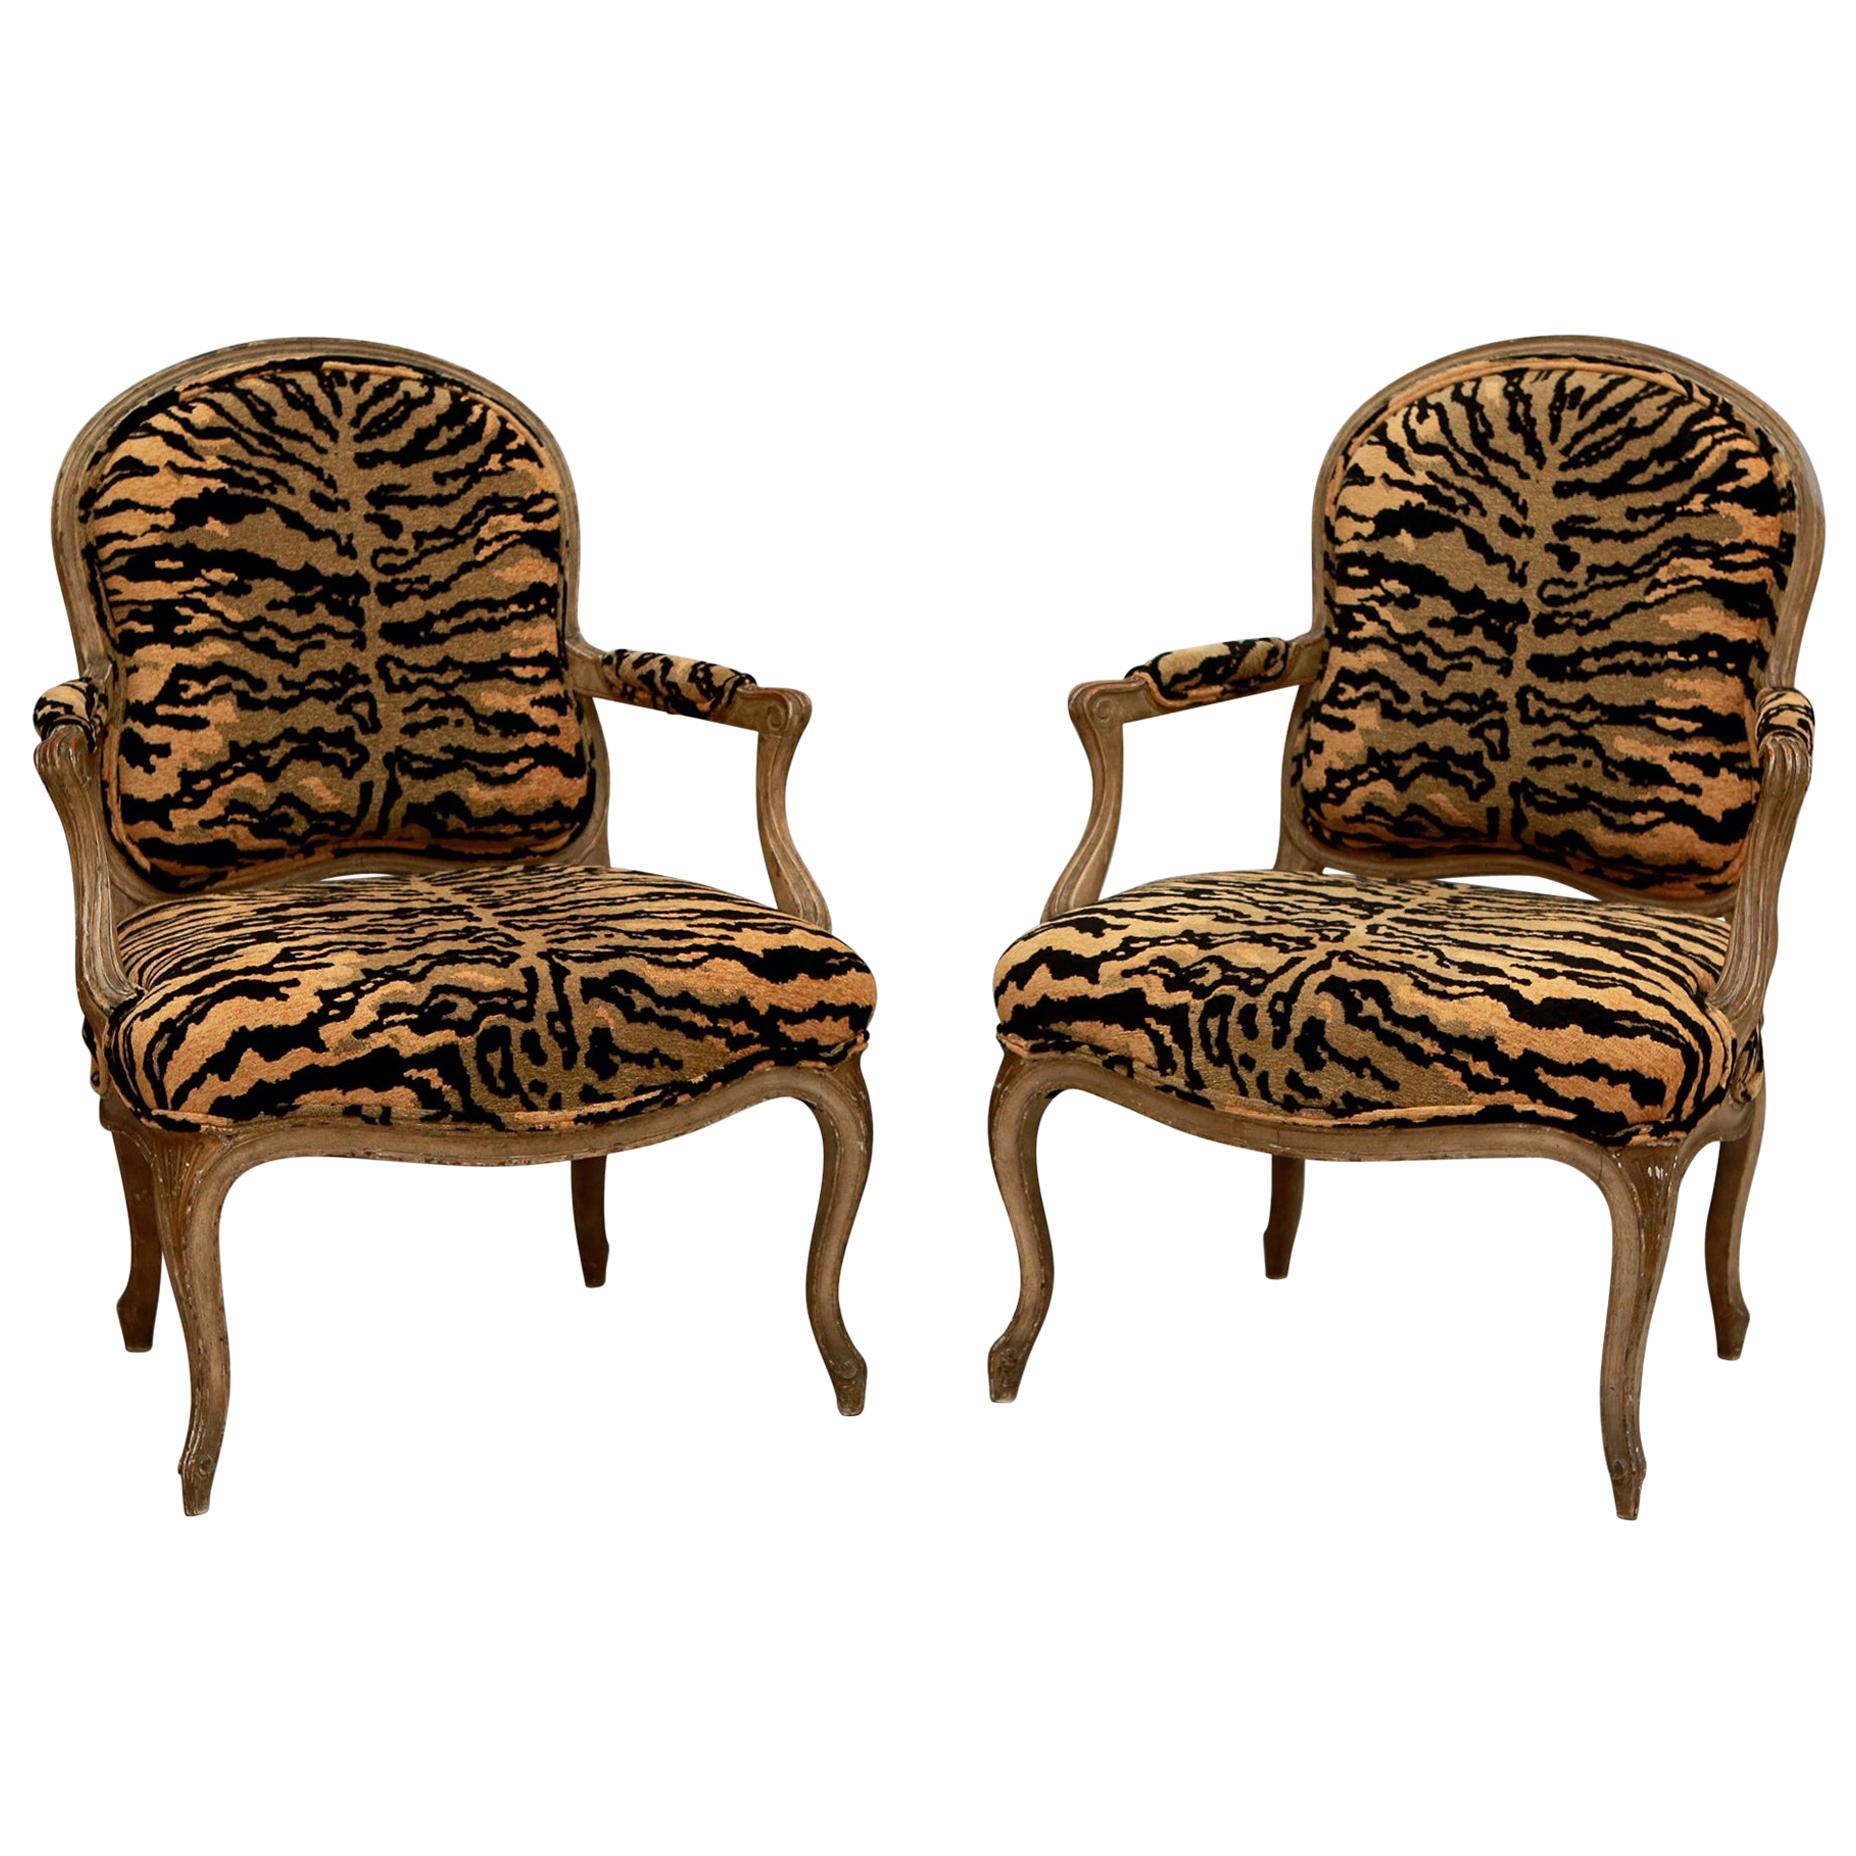 Pair of Carved French Armchairs with Animal Print Upholstery